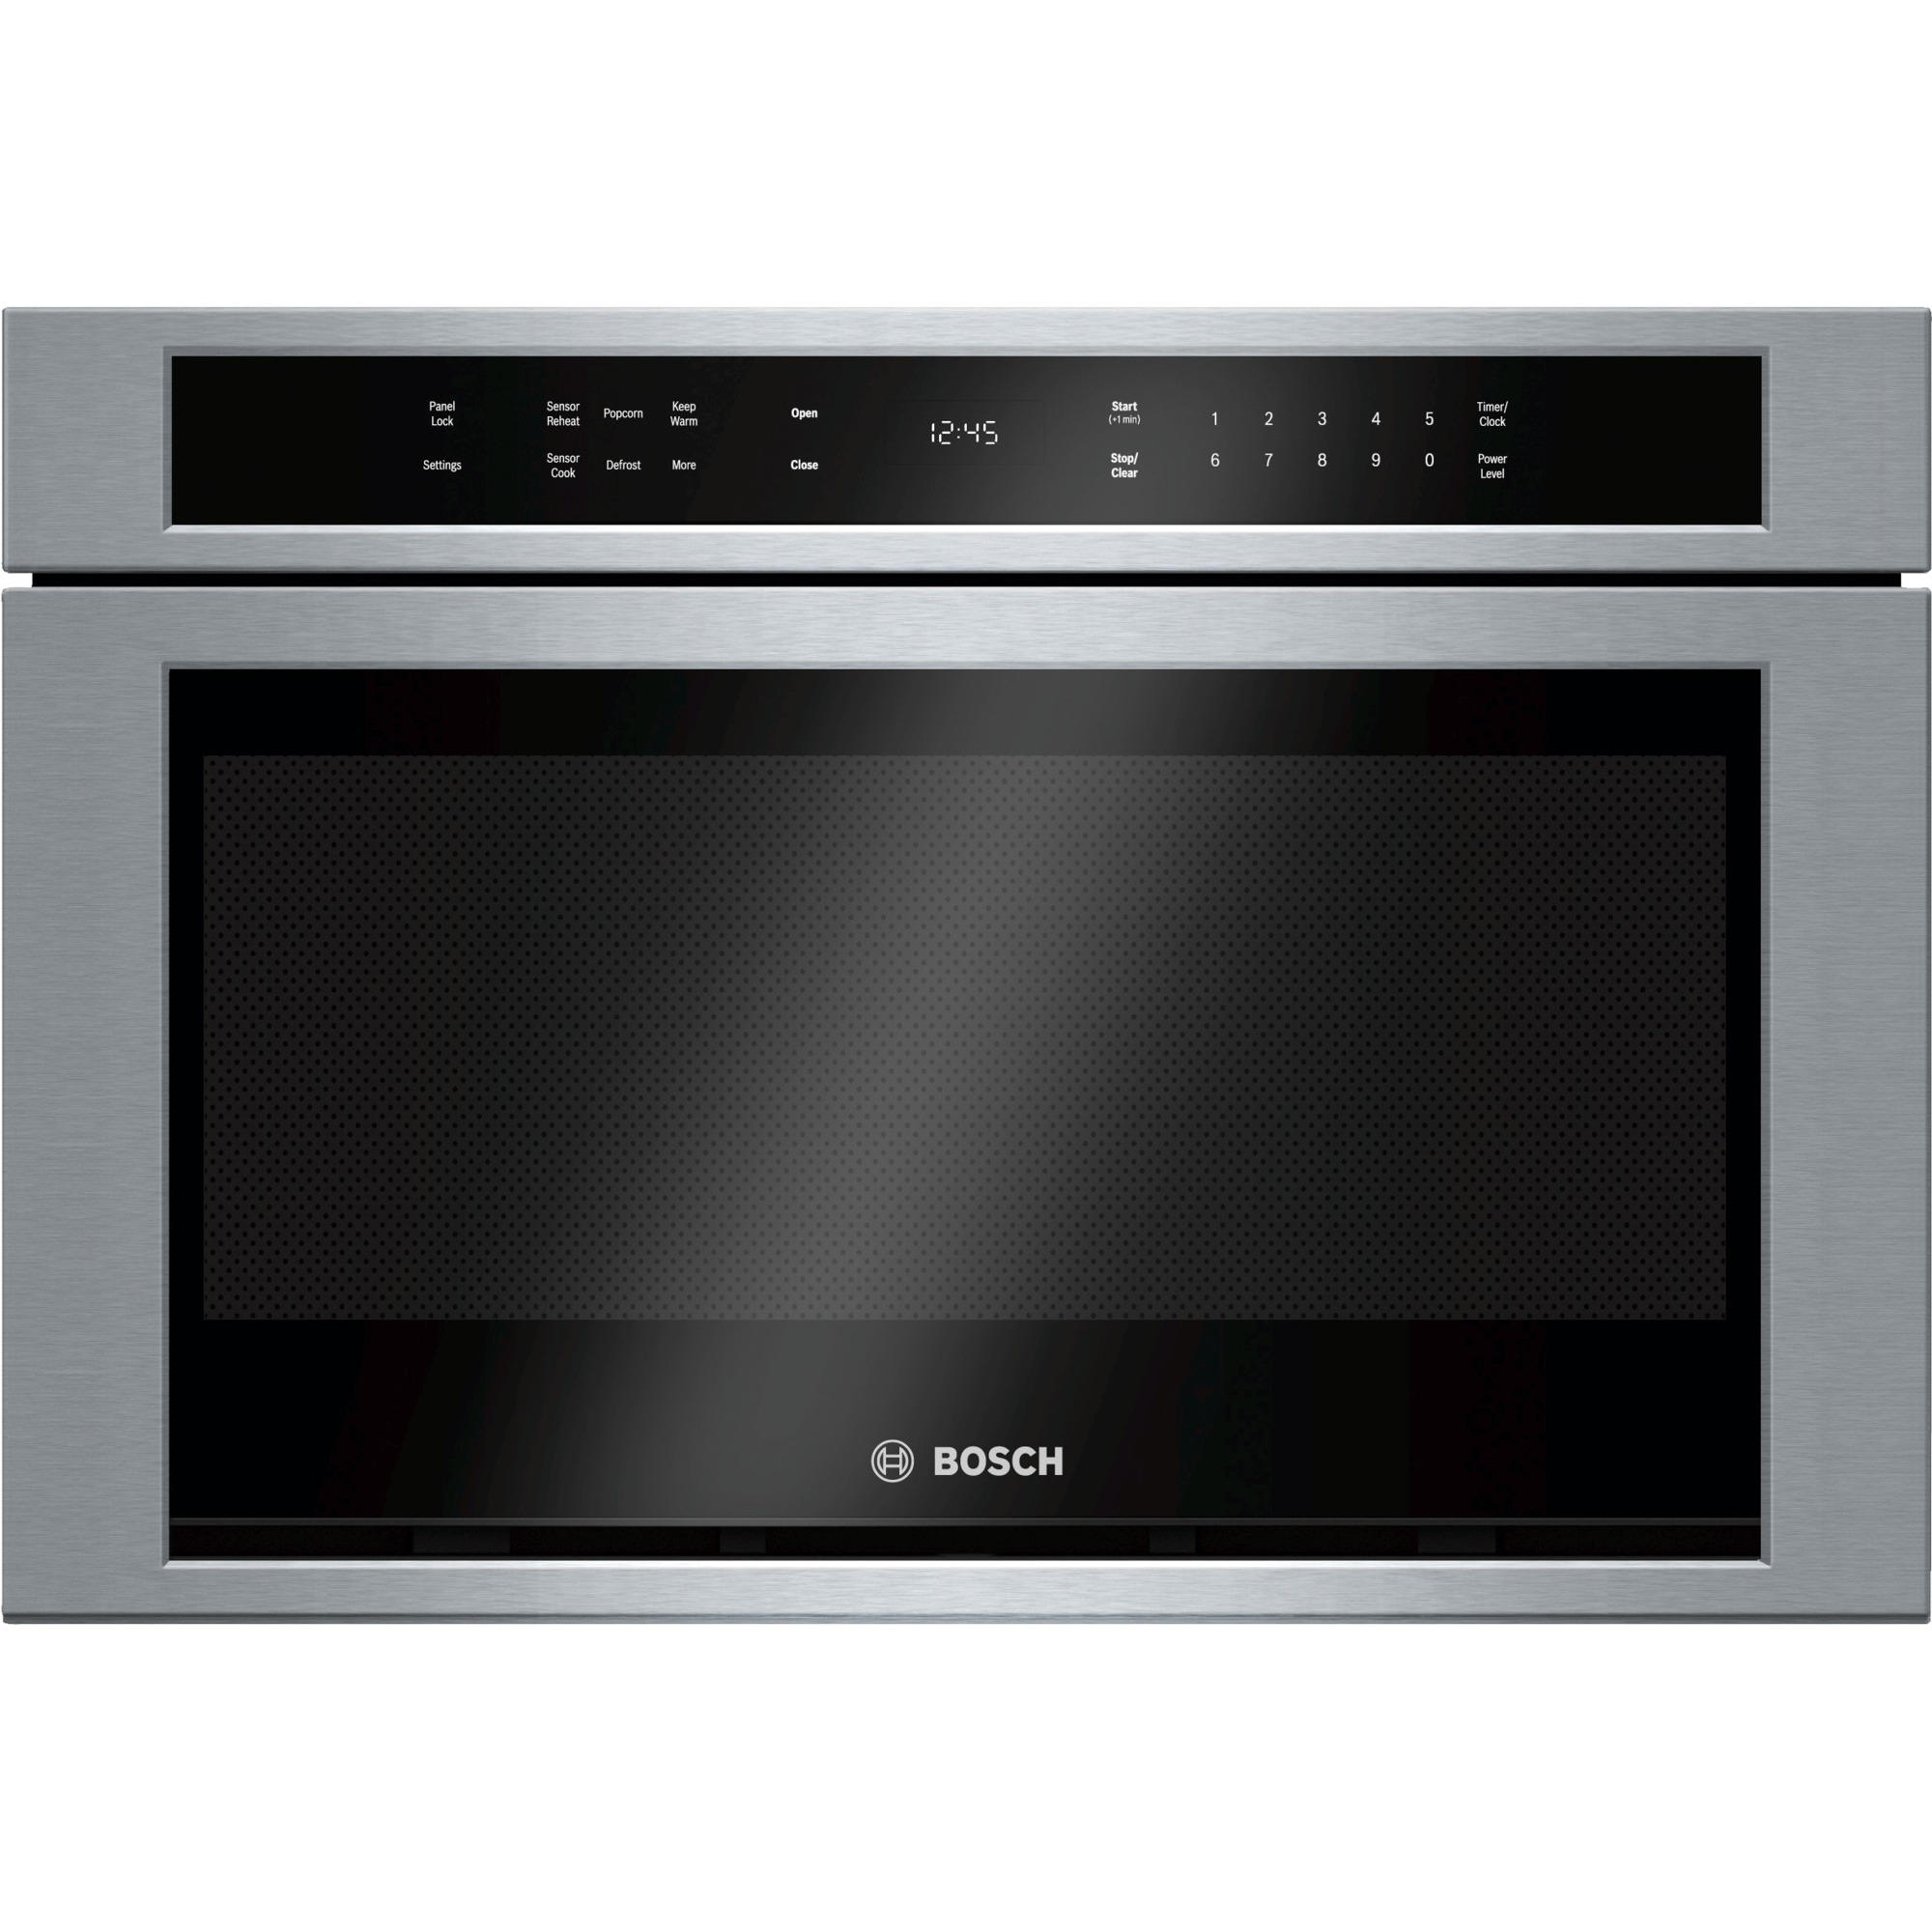 Bosch HMD8451UC 1.2 cu. ft. 800 Series Drawer Microwave - Stainless Steel